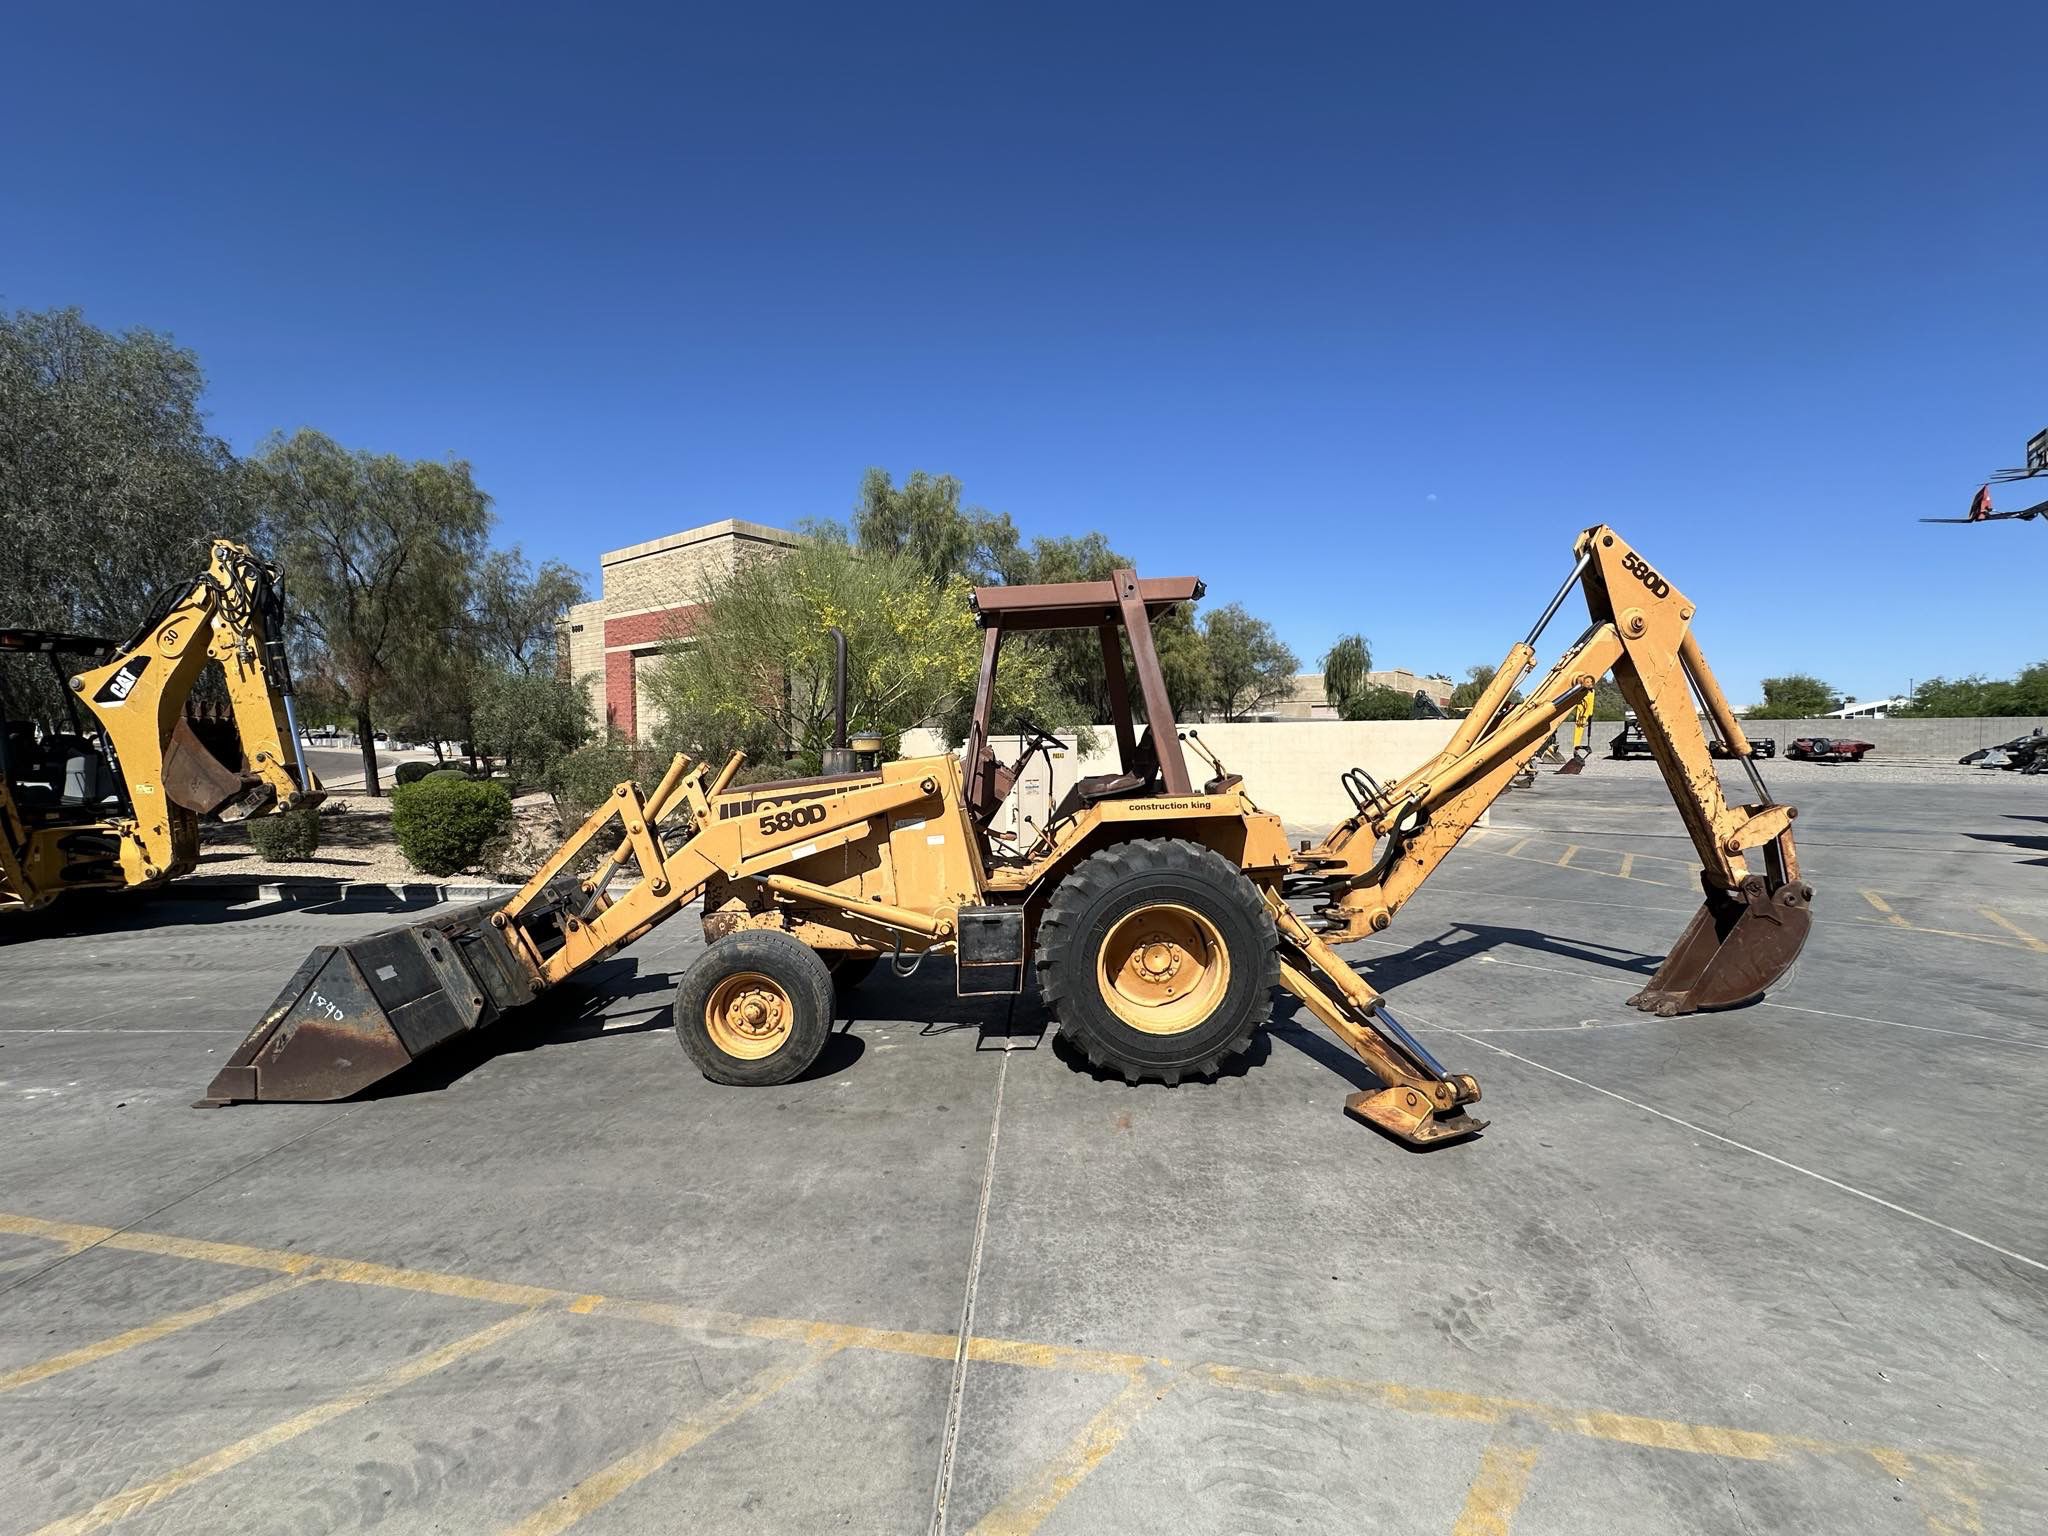 1983 CASE 580D Backhoe 2WD With Extra Buckets And Forks